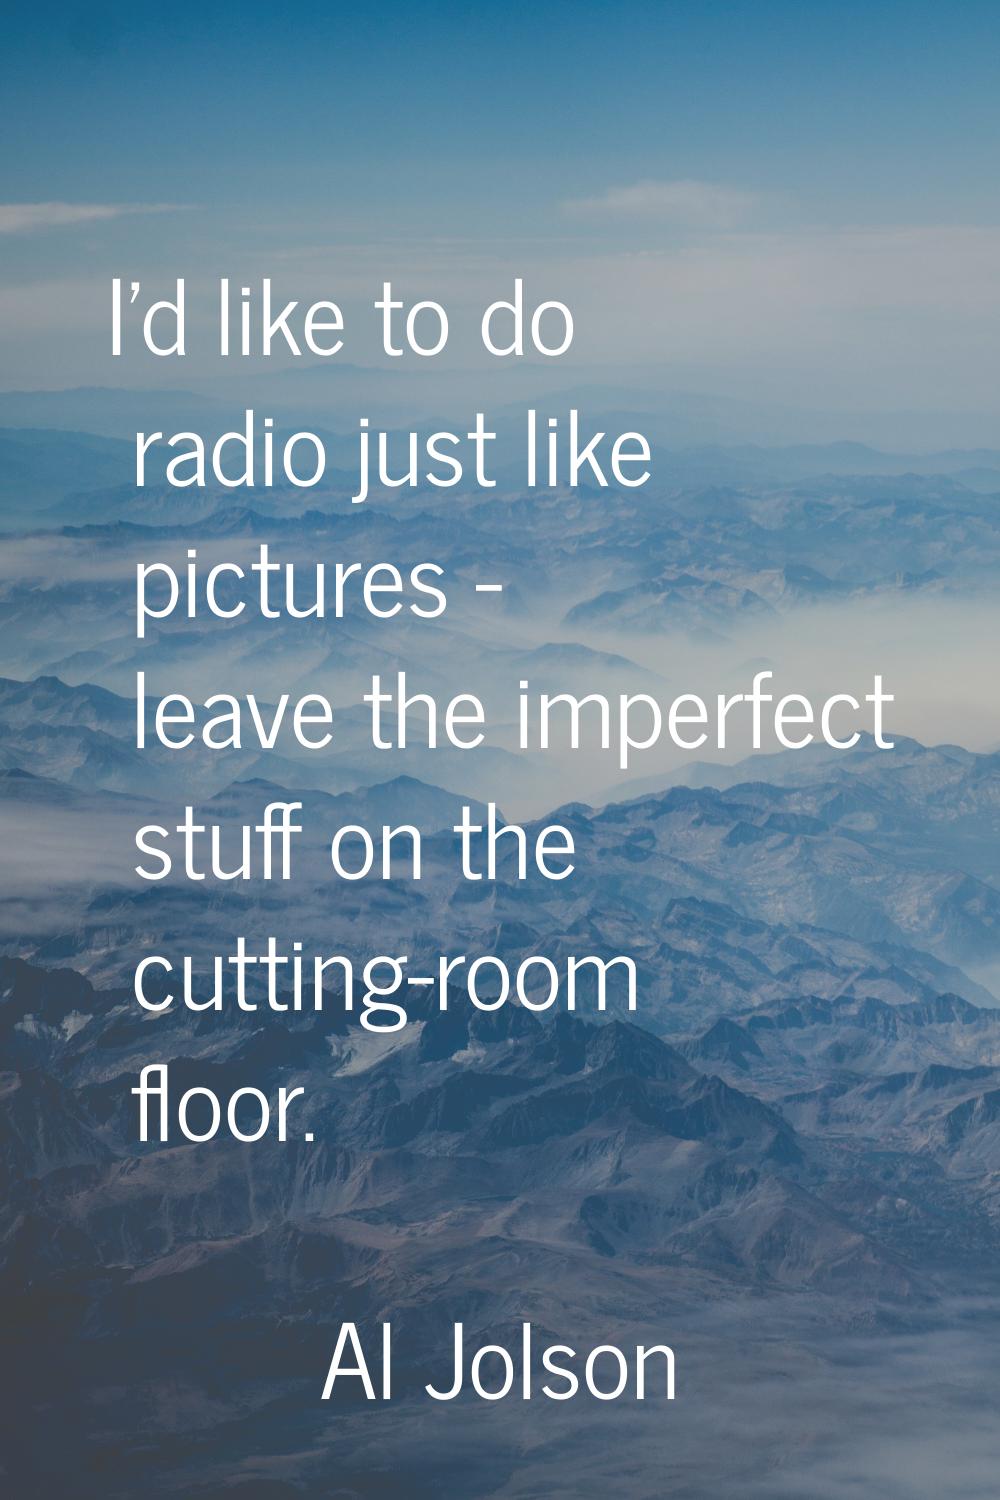 I'd like to do radio just like pictures - leave the imperfect stuff on the cutting-room floor.